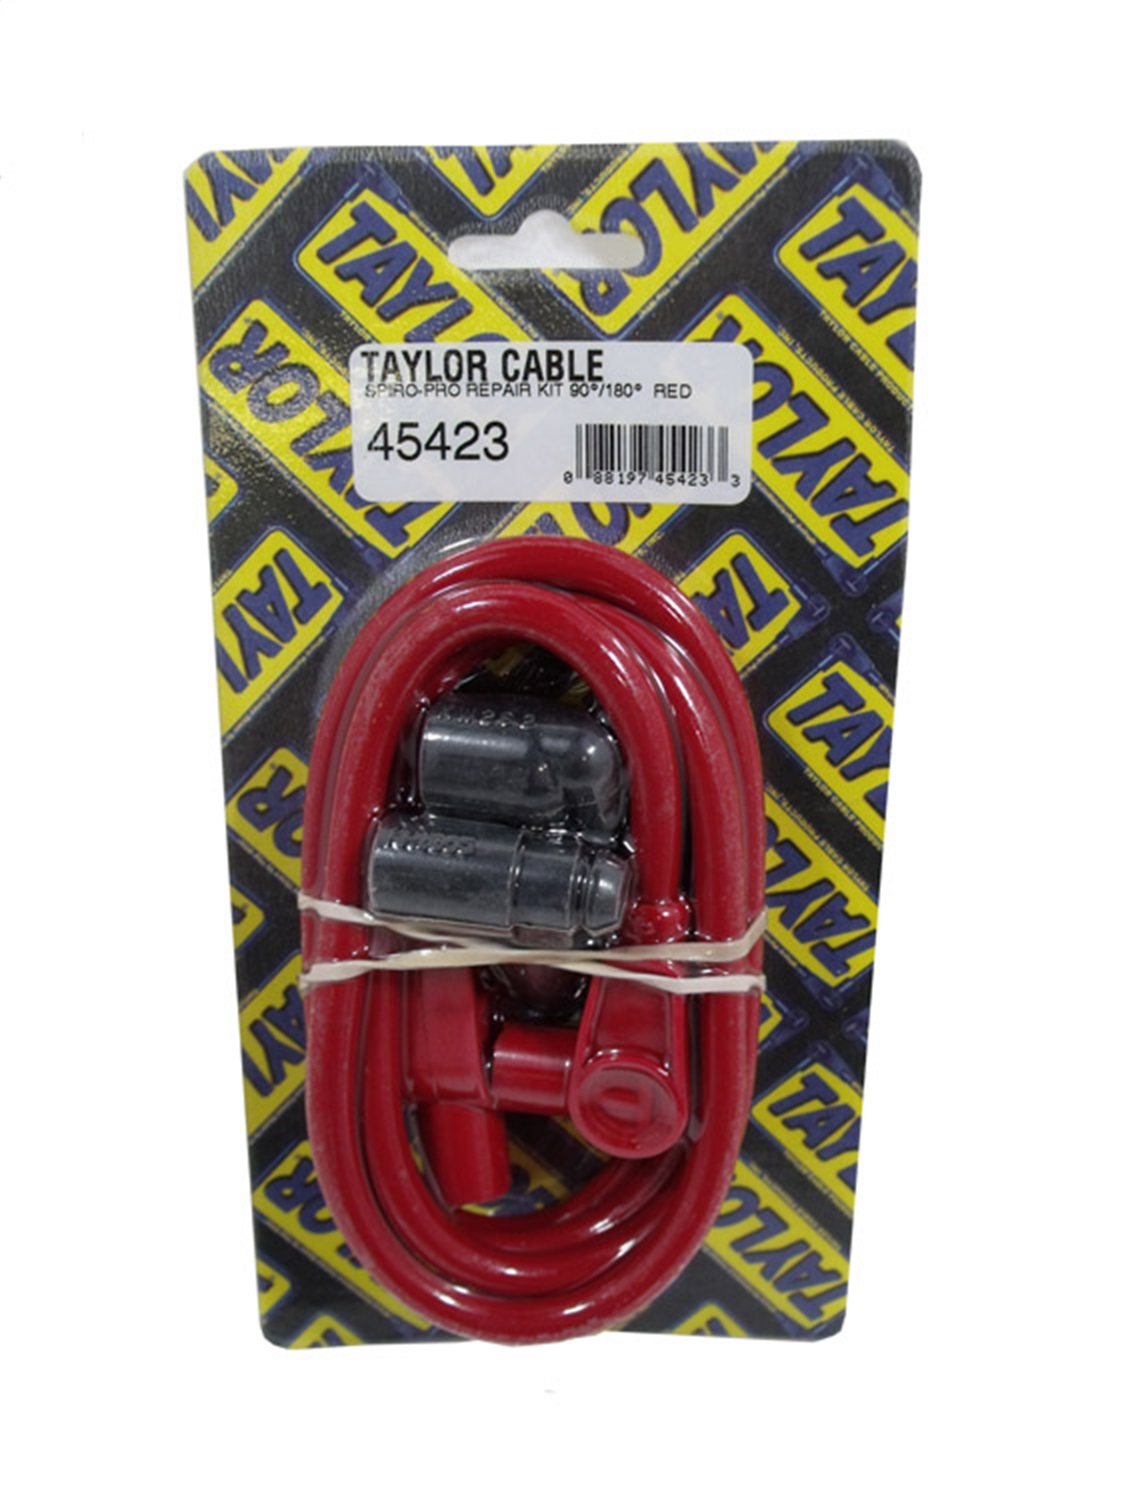 Taylor Cable Taylor Cable 45423 8mm Spiro Pro; Spark Plug Wire Repair Kit